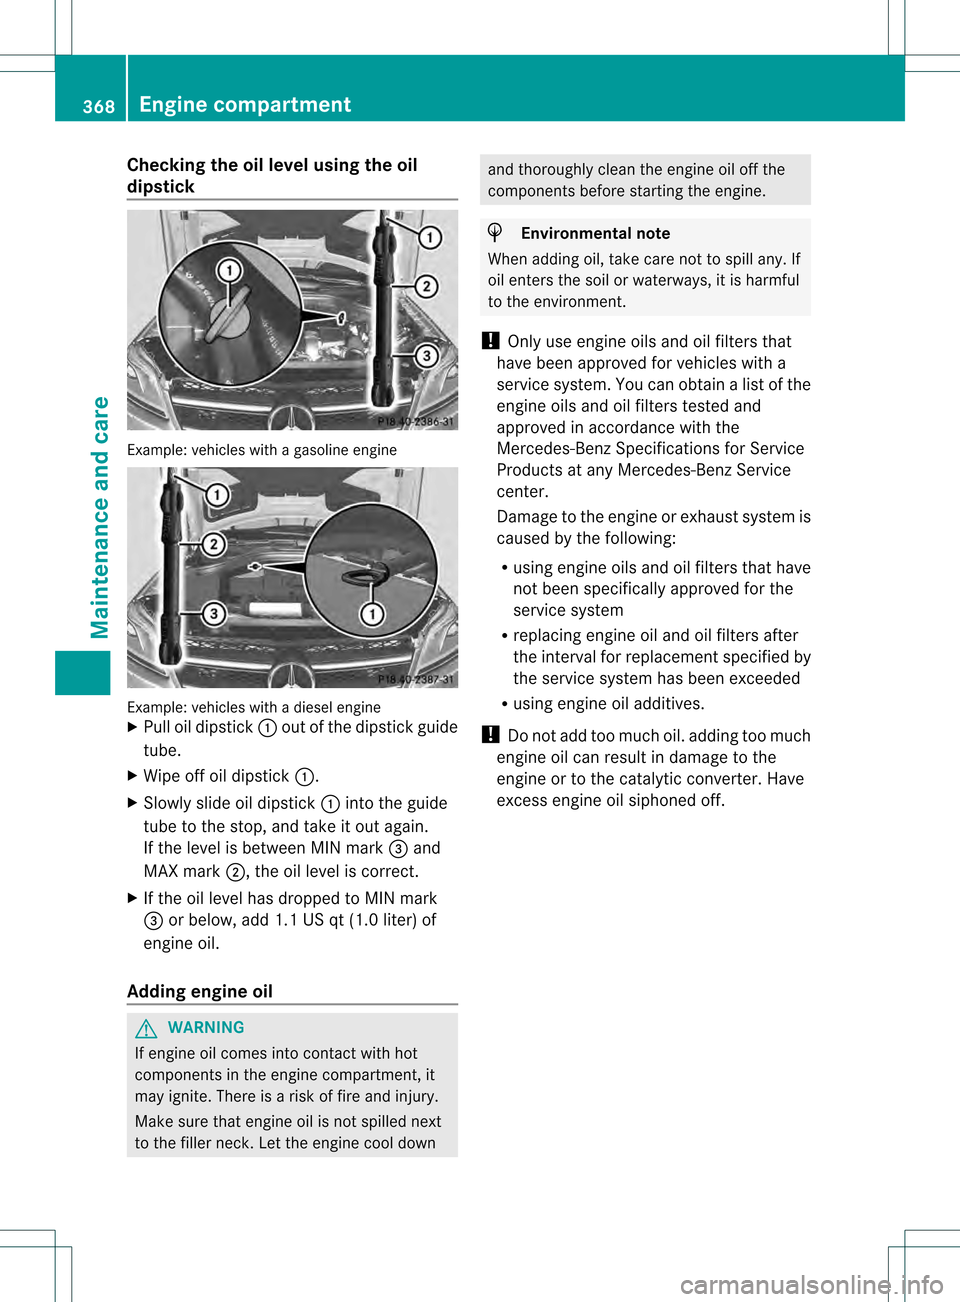 MERCEDES-BENZ GL-Class 2013 X166 Owners Manual Checking the oil level using the oil
dipstick
Example
:vehicles with a gasoline engine Example: vehicles with a diesel engine
X Pull oil dipstick 0002out of the dipstick guide
tube.
X Wipe off oil dip